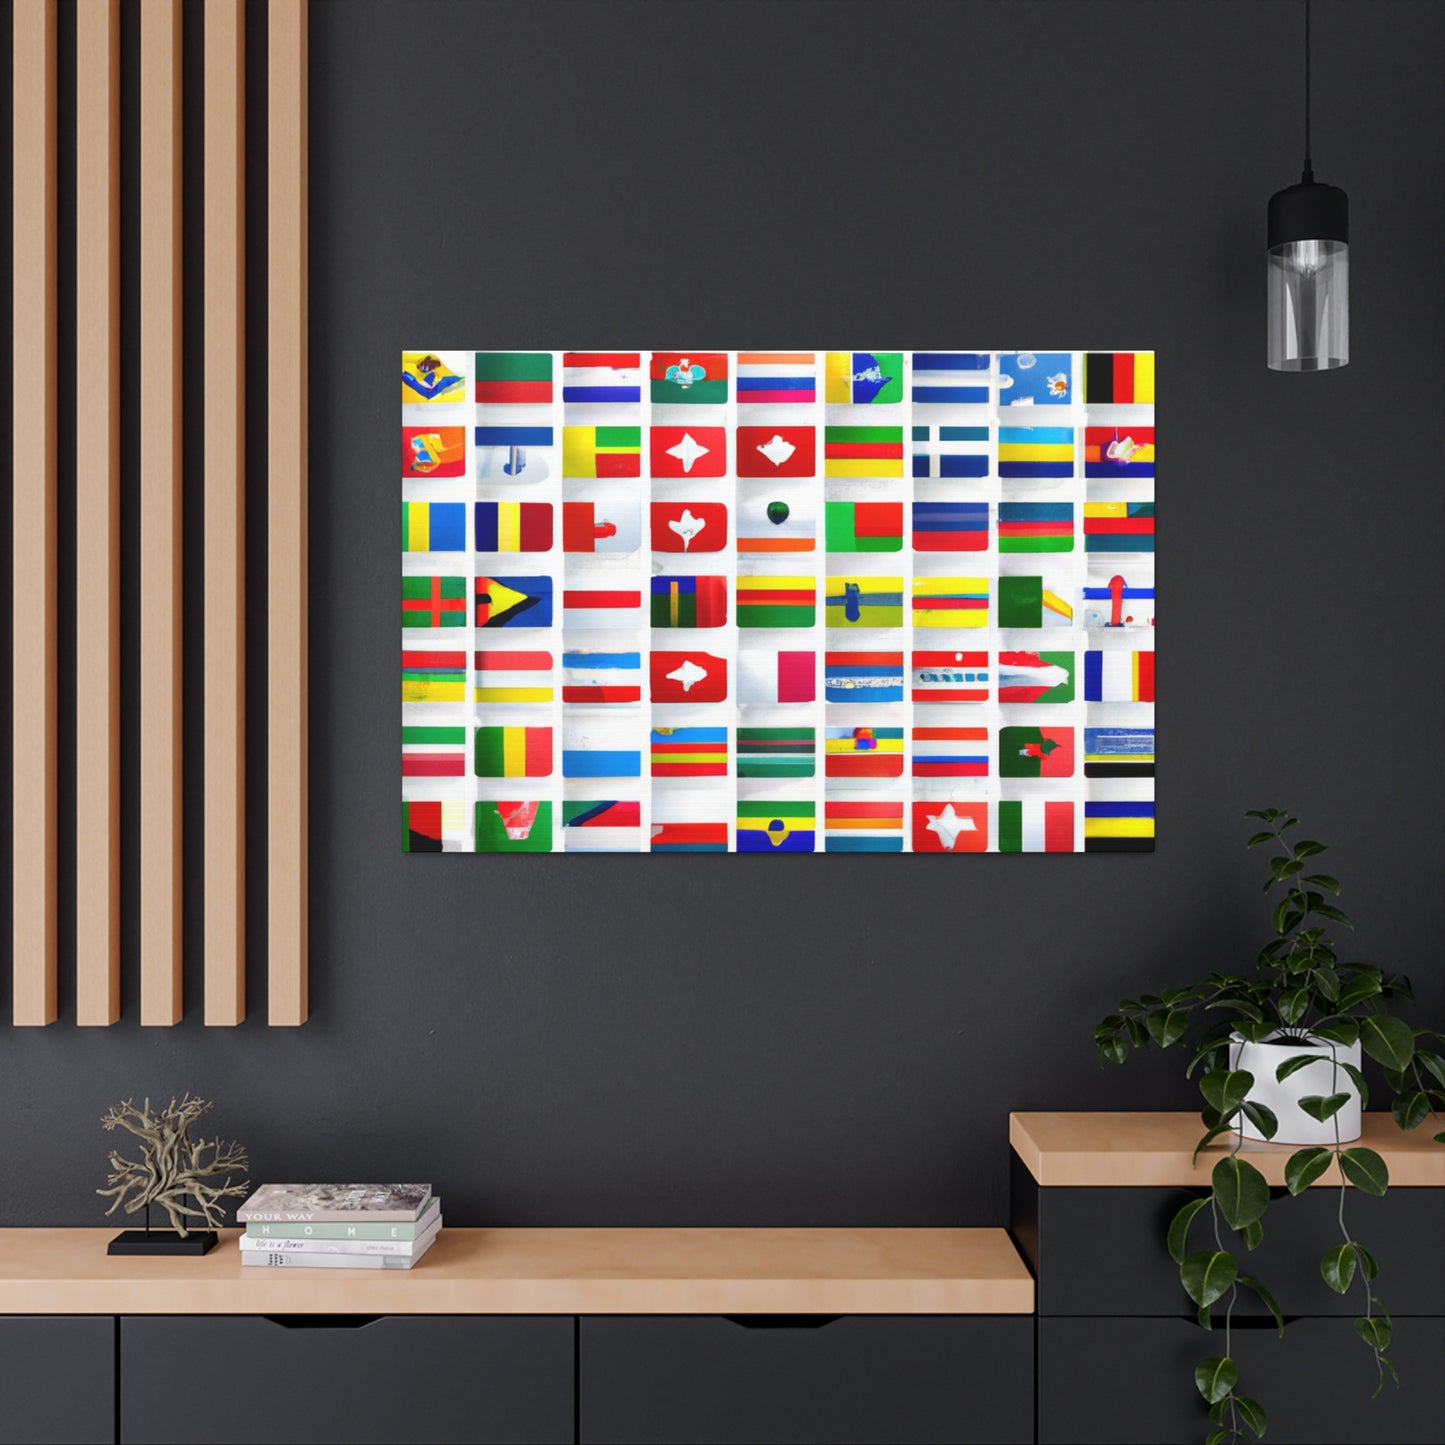 Edward Levett, Flagmaker of the 19th Century - Flags Of The World Canvas Wall Art